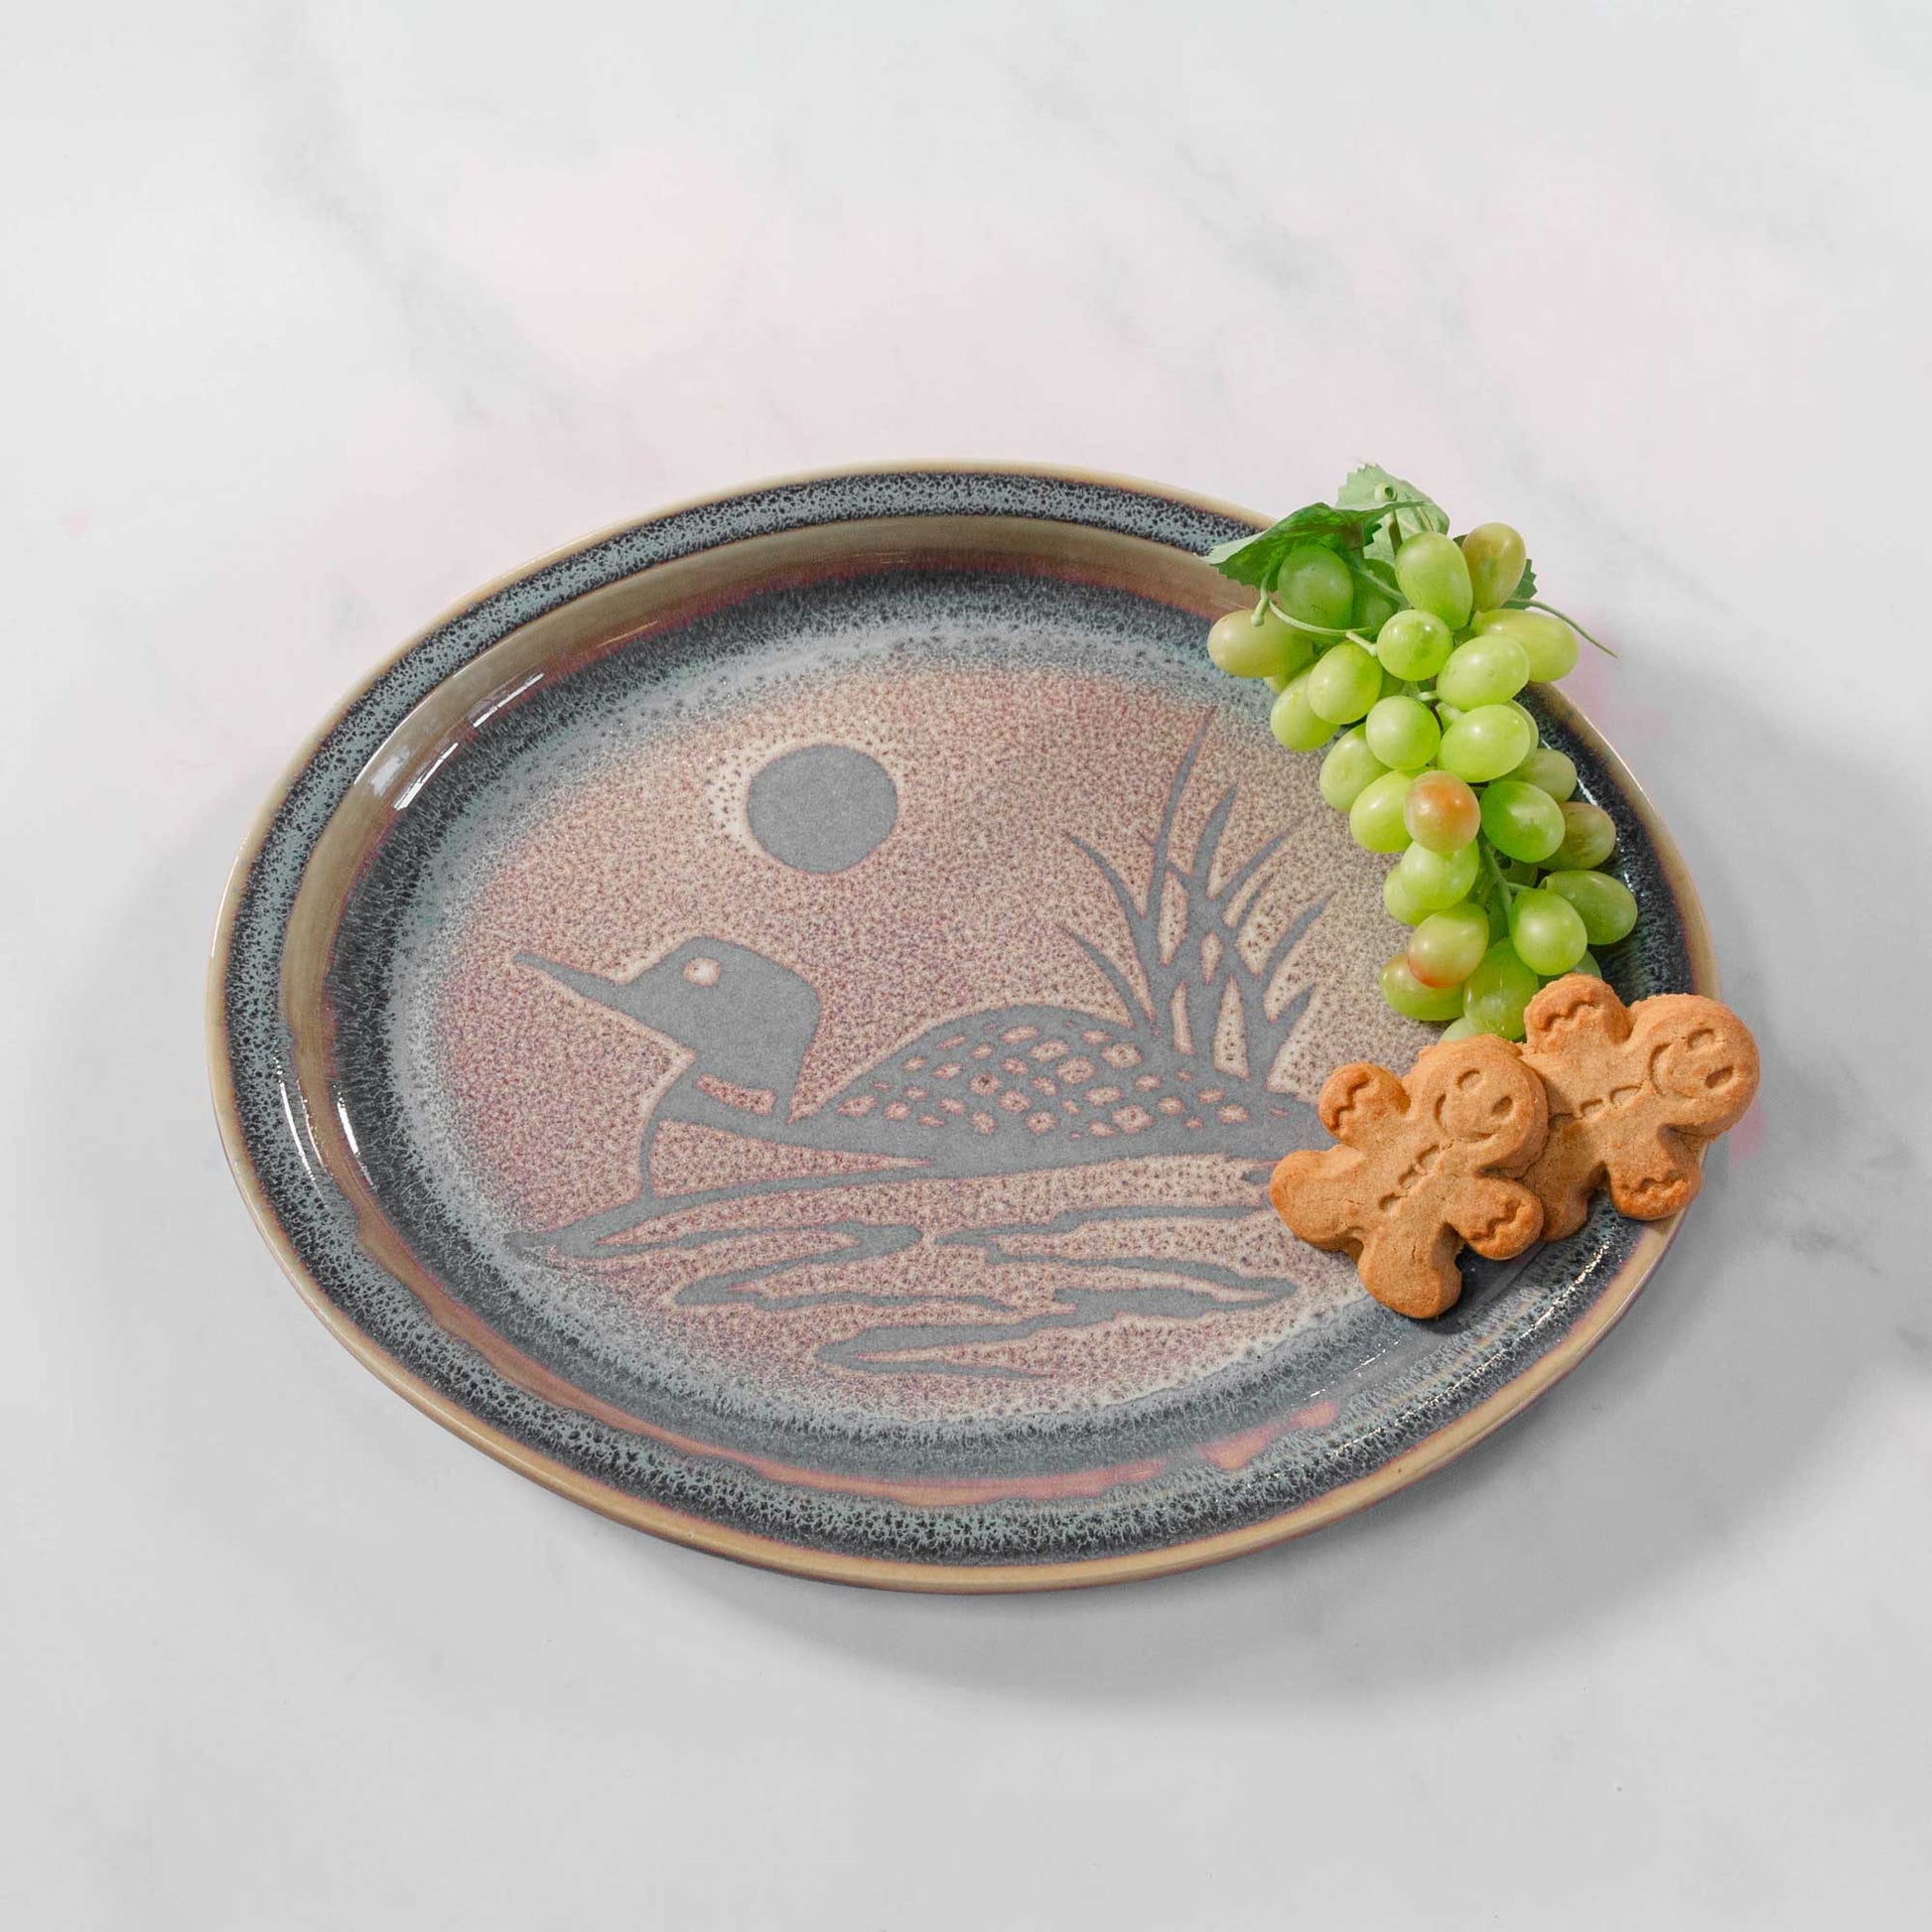 Handmade Pottery Oval Platter made by Georgetown Pottery in Maine